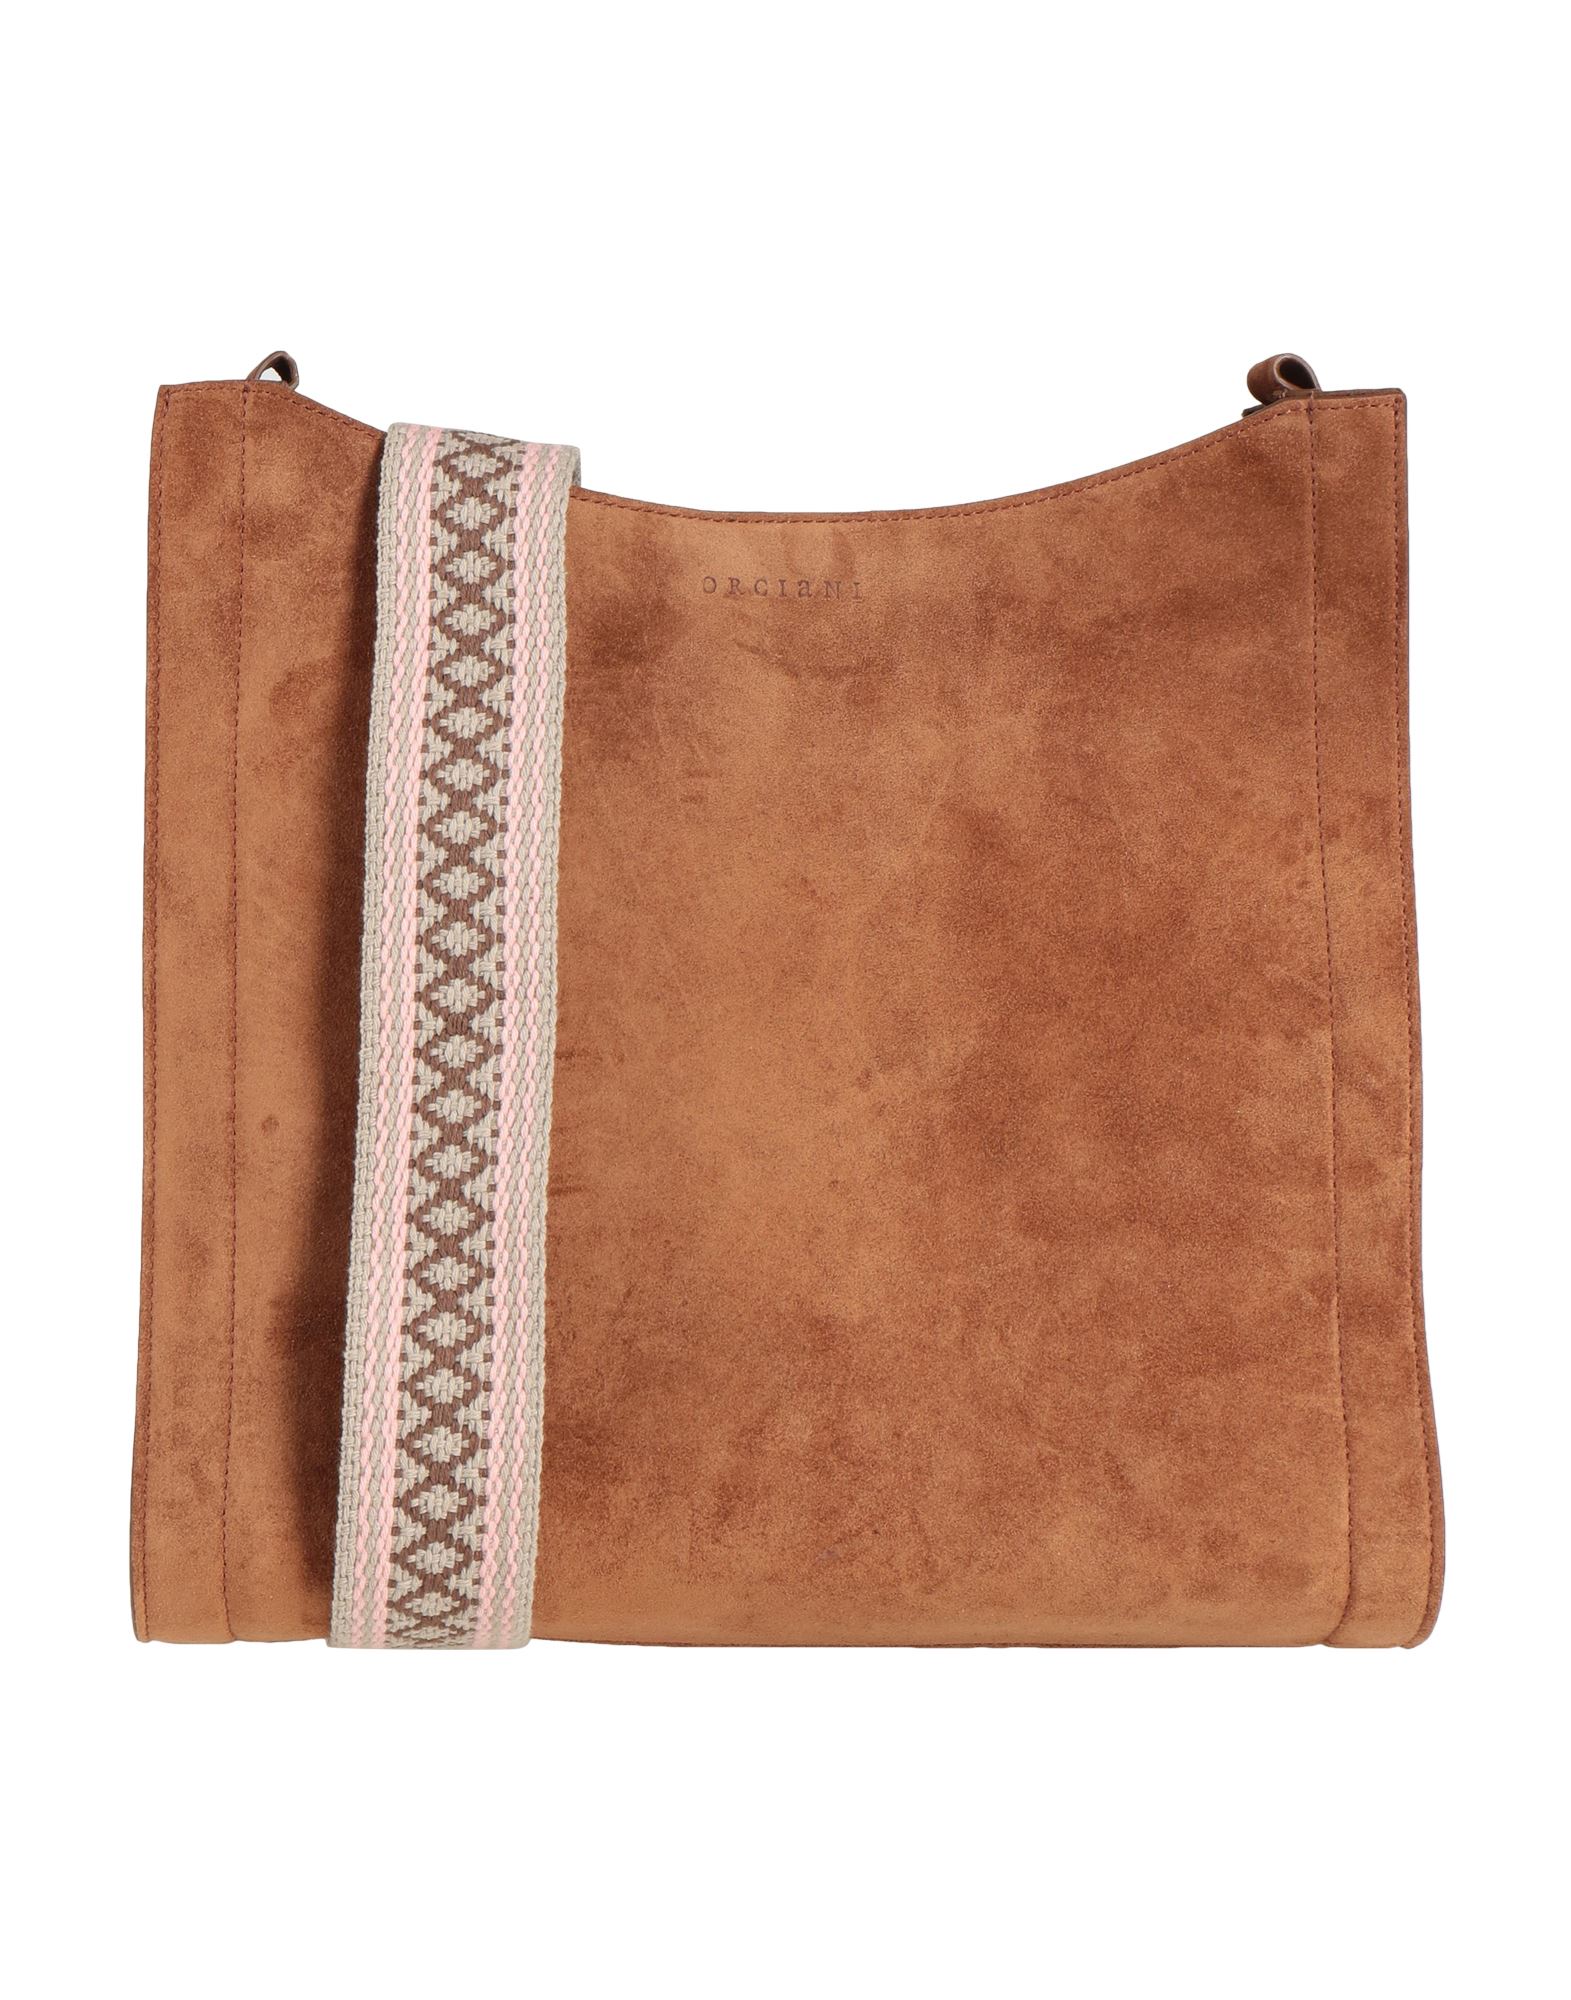 ORCIANI ORCIANI WOMAN CROSS-BODY BAG BROWN SIZE - SOFT LEATHER